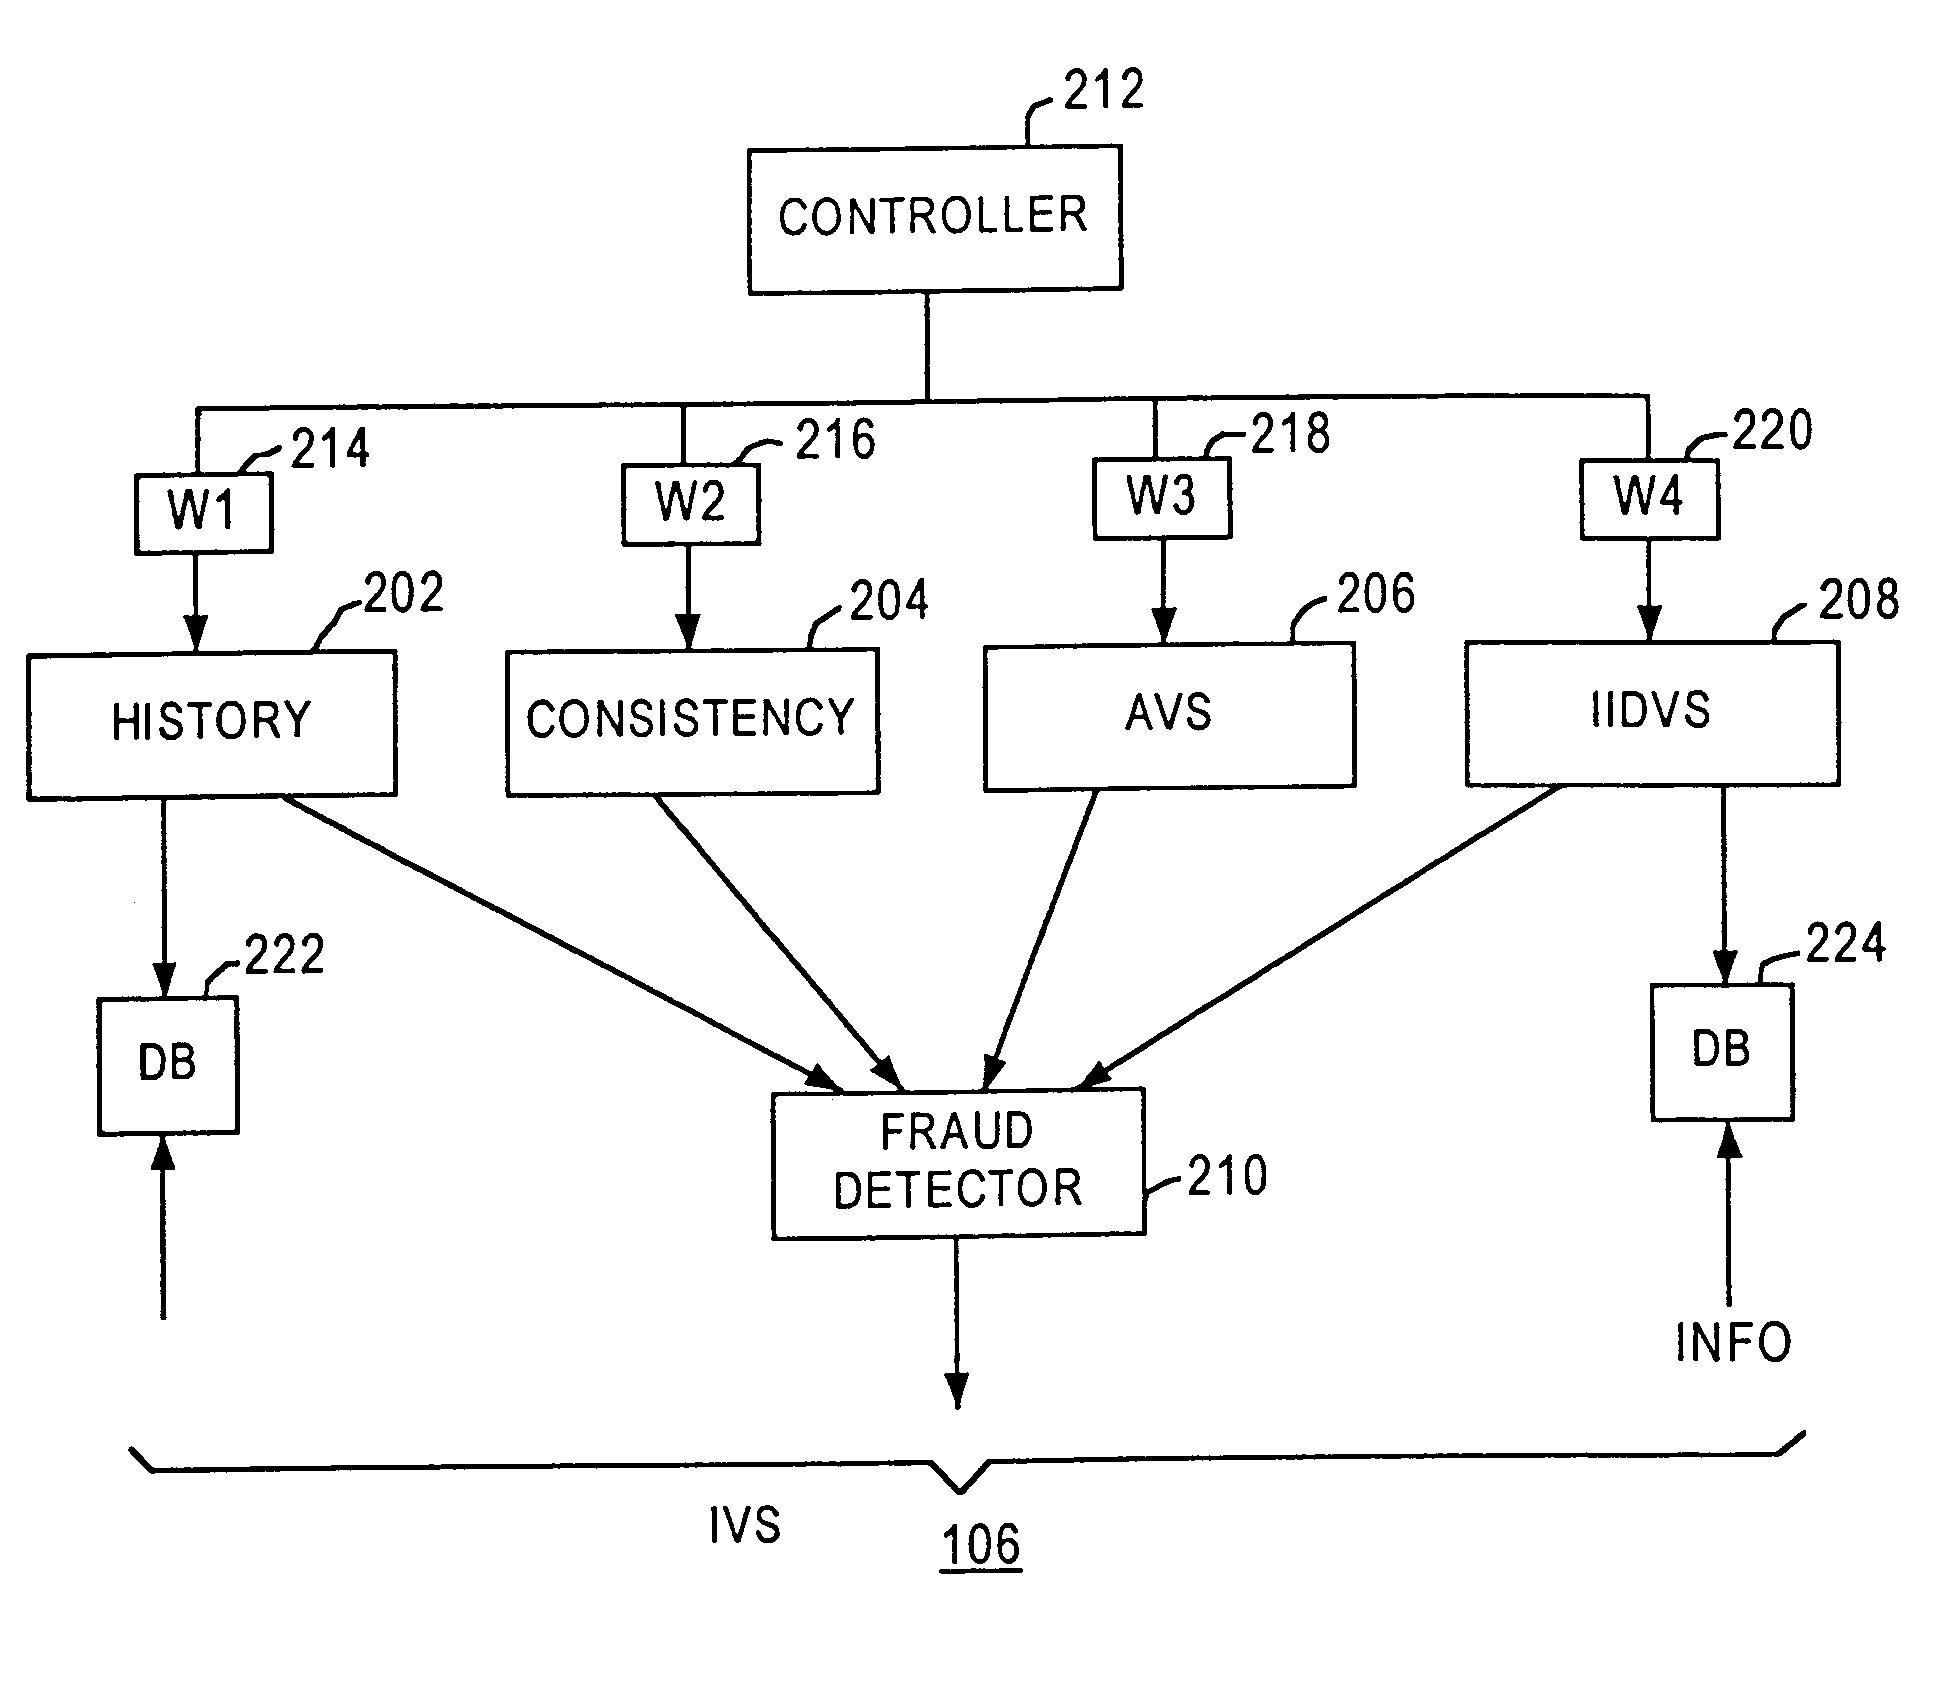 Method and apparatus for evaluating fraud risk in an electronic commerce transaction